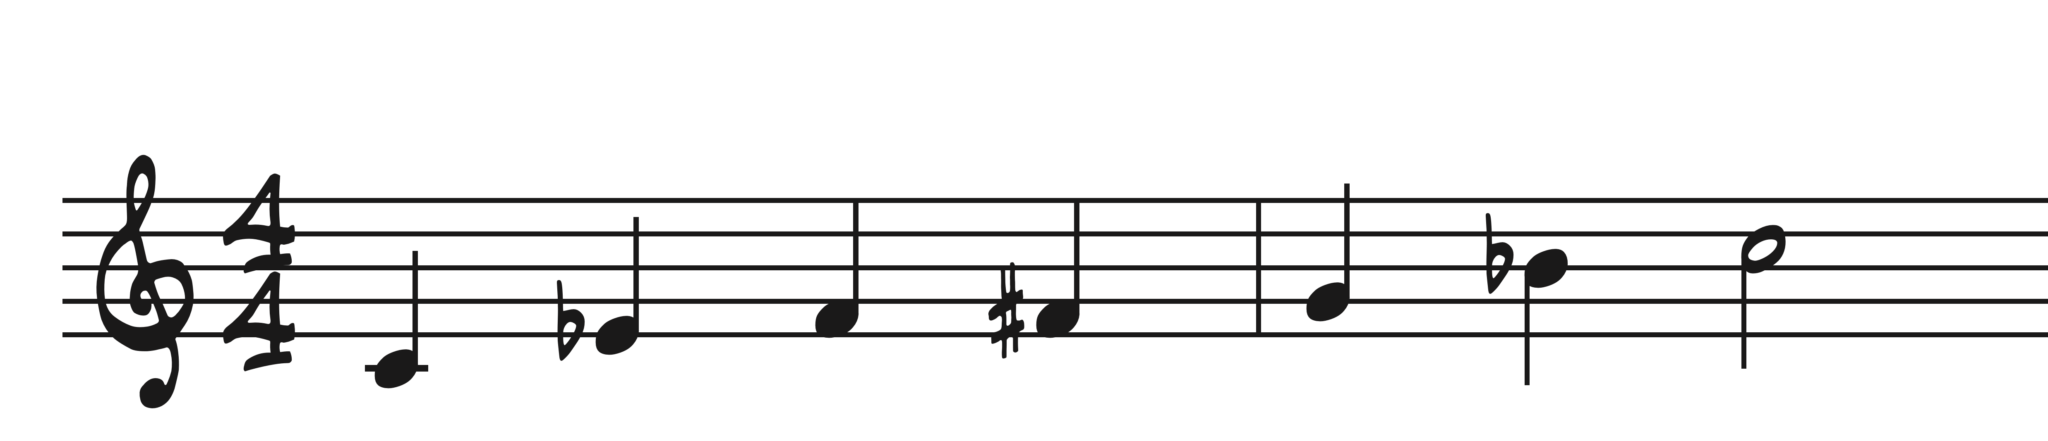 jazz scales: Blues scale